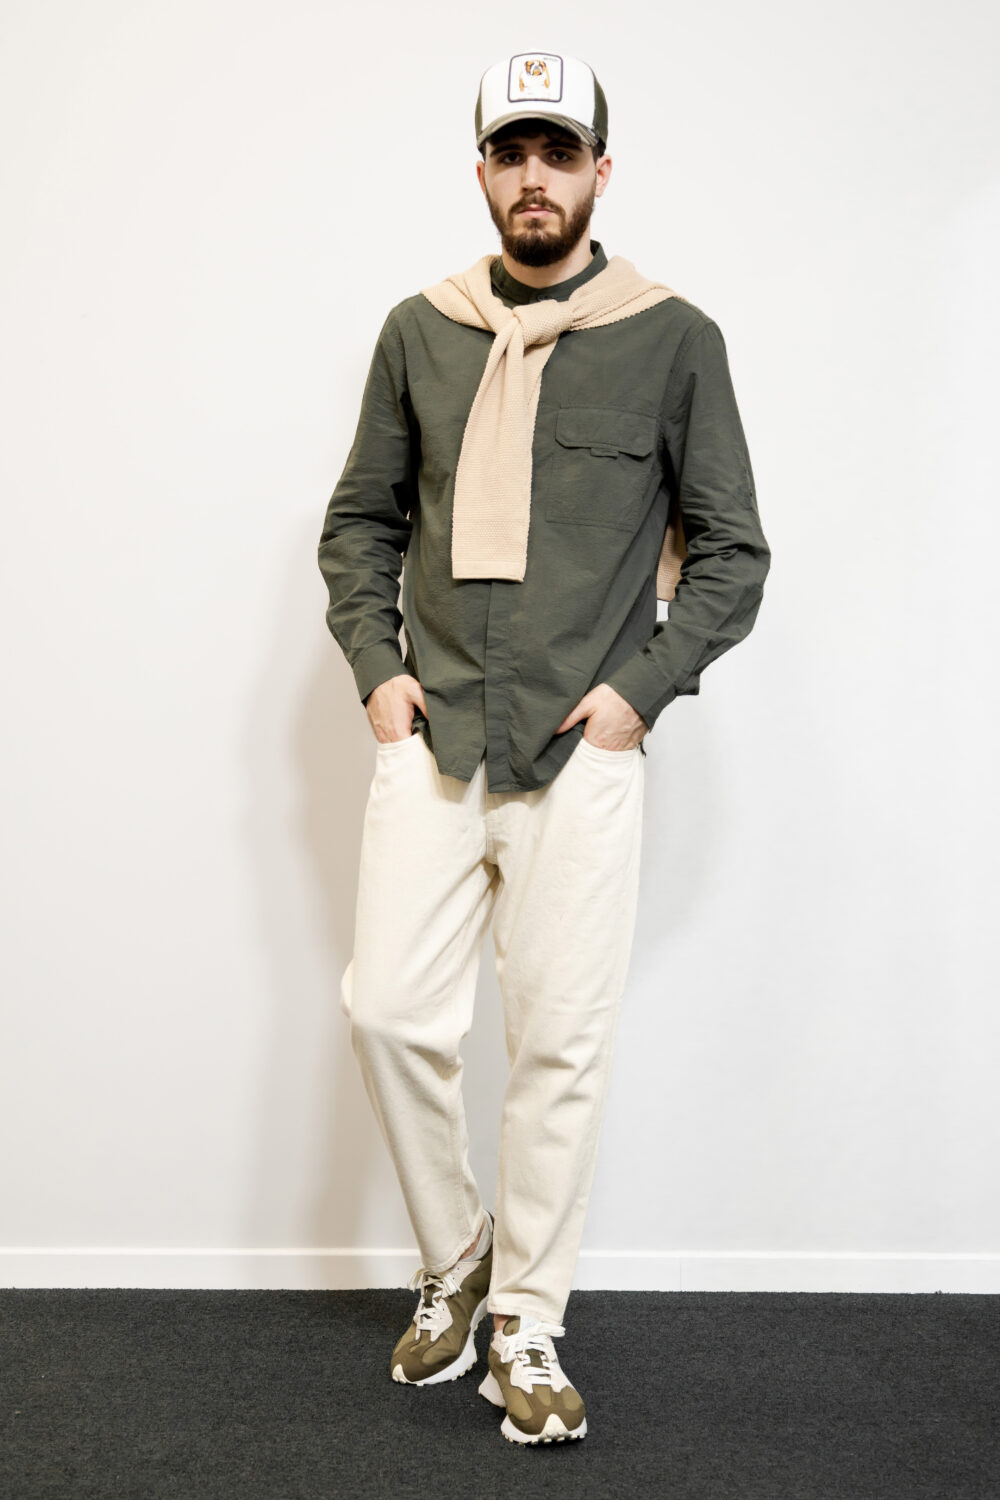 OUTFIT UOMO LOOSE FIT MILITARE #8361 - Foto 4